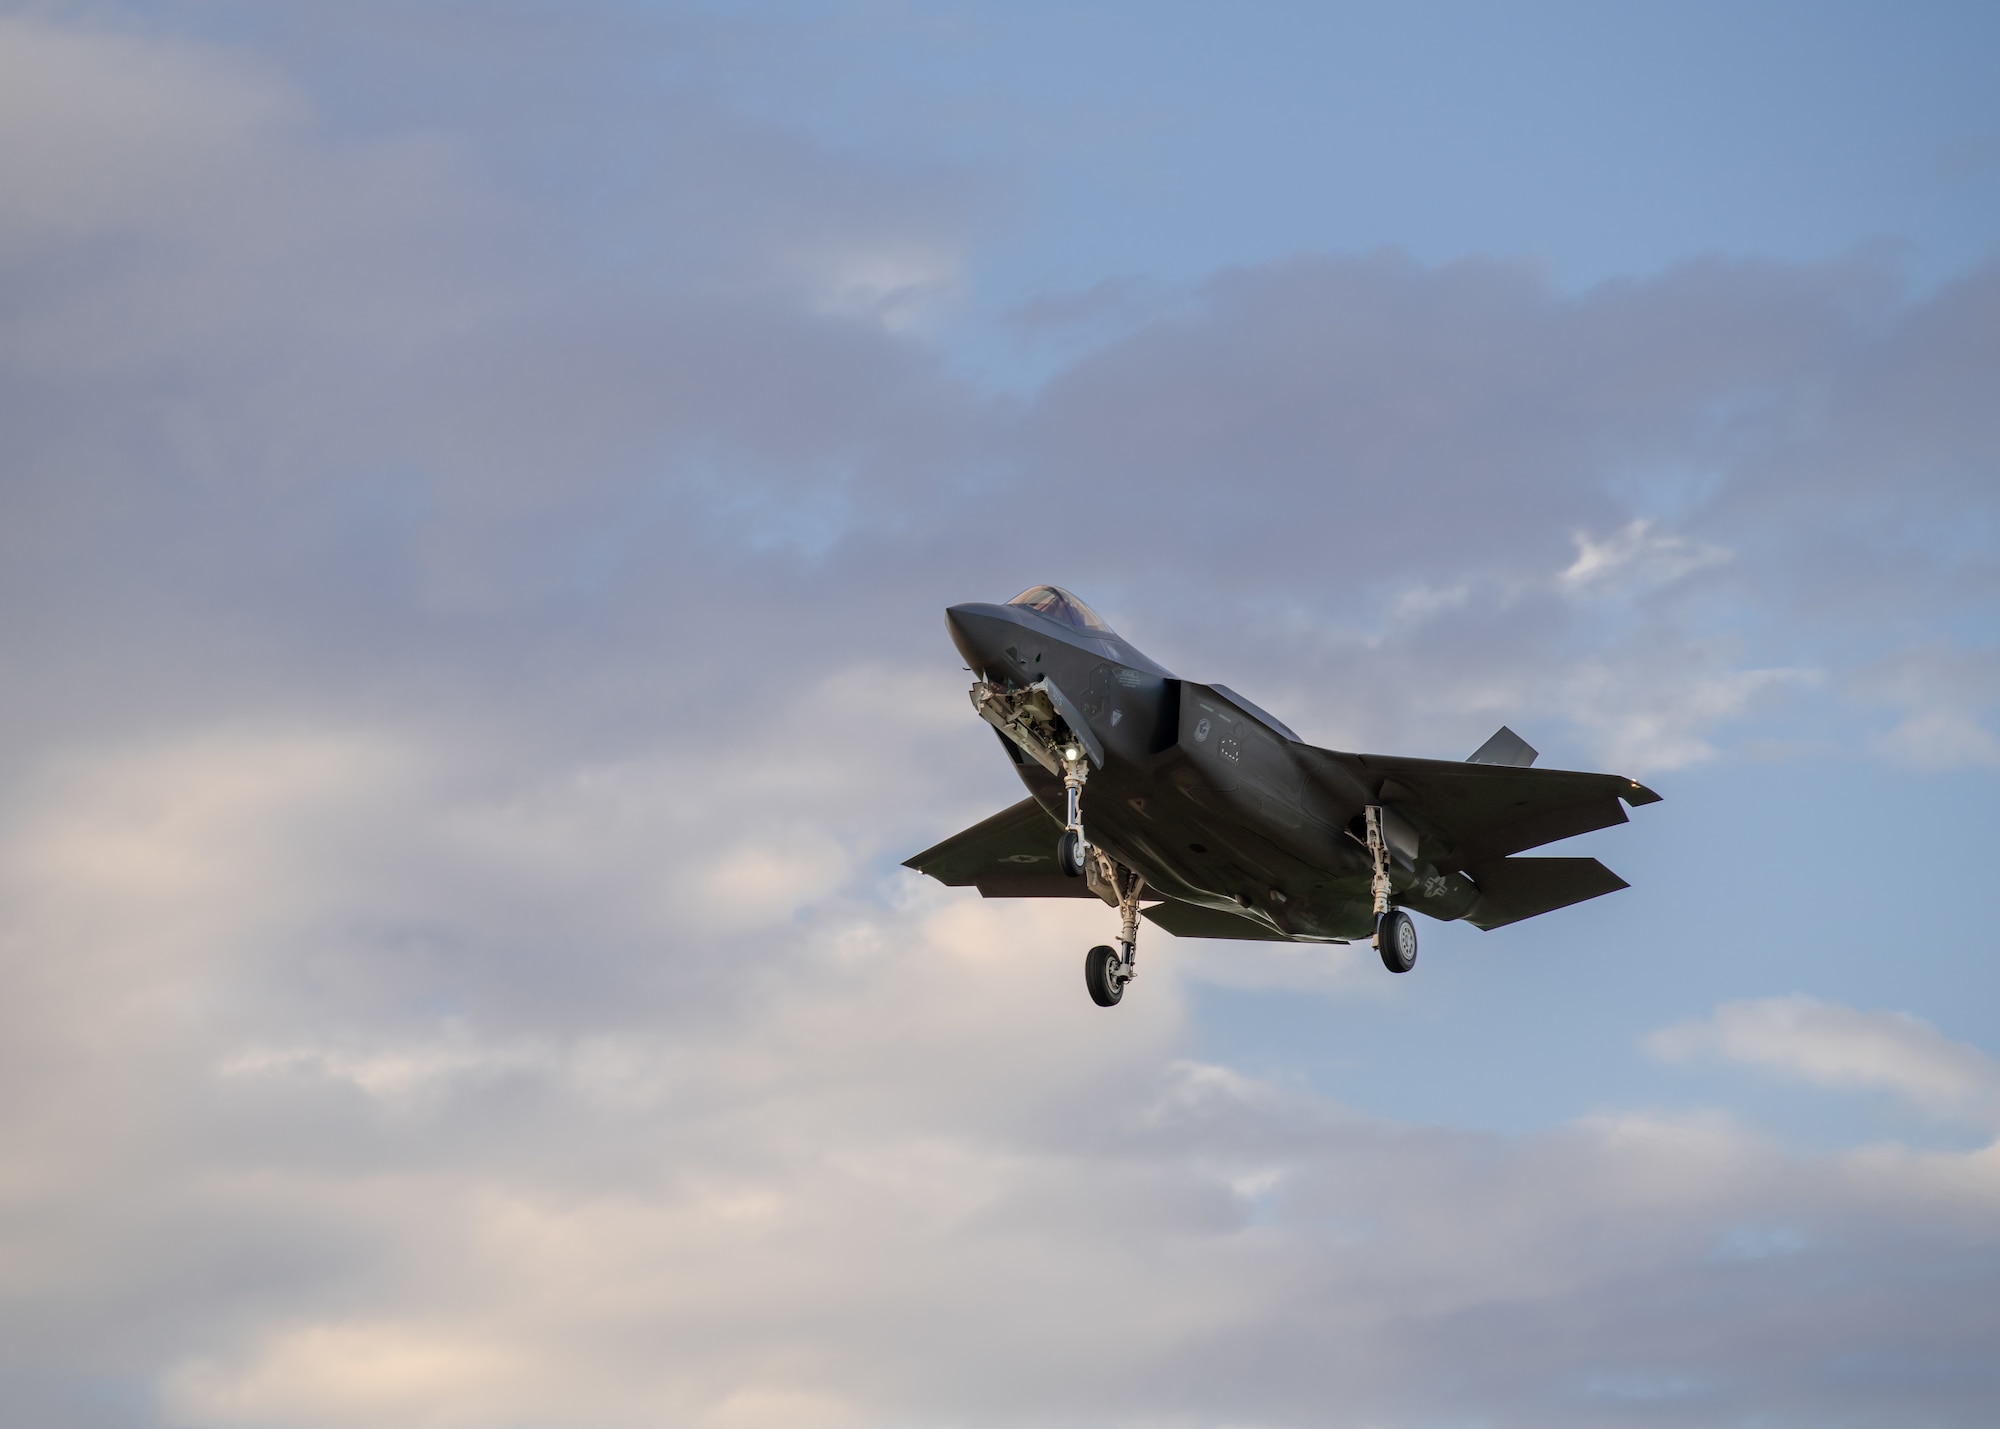 An F-35A Lightning II assigned to the 308th Fighter Squadron, prepares for landing Sept. 10, 2019, at Luke Air Force Base, Ariz. Luke AFB houses more than 150 aircraft, making it the largest fighter base in the world. (U.S. Air Force photo by Airman 1st Class Aspen Reid)